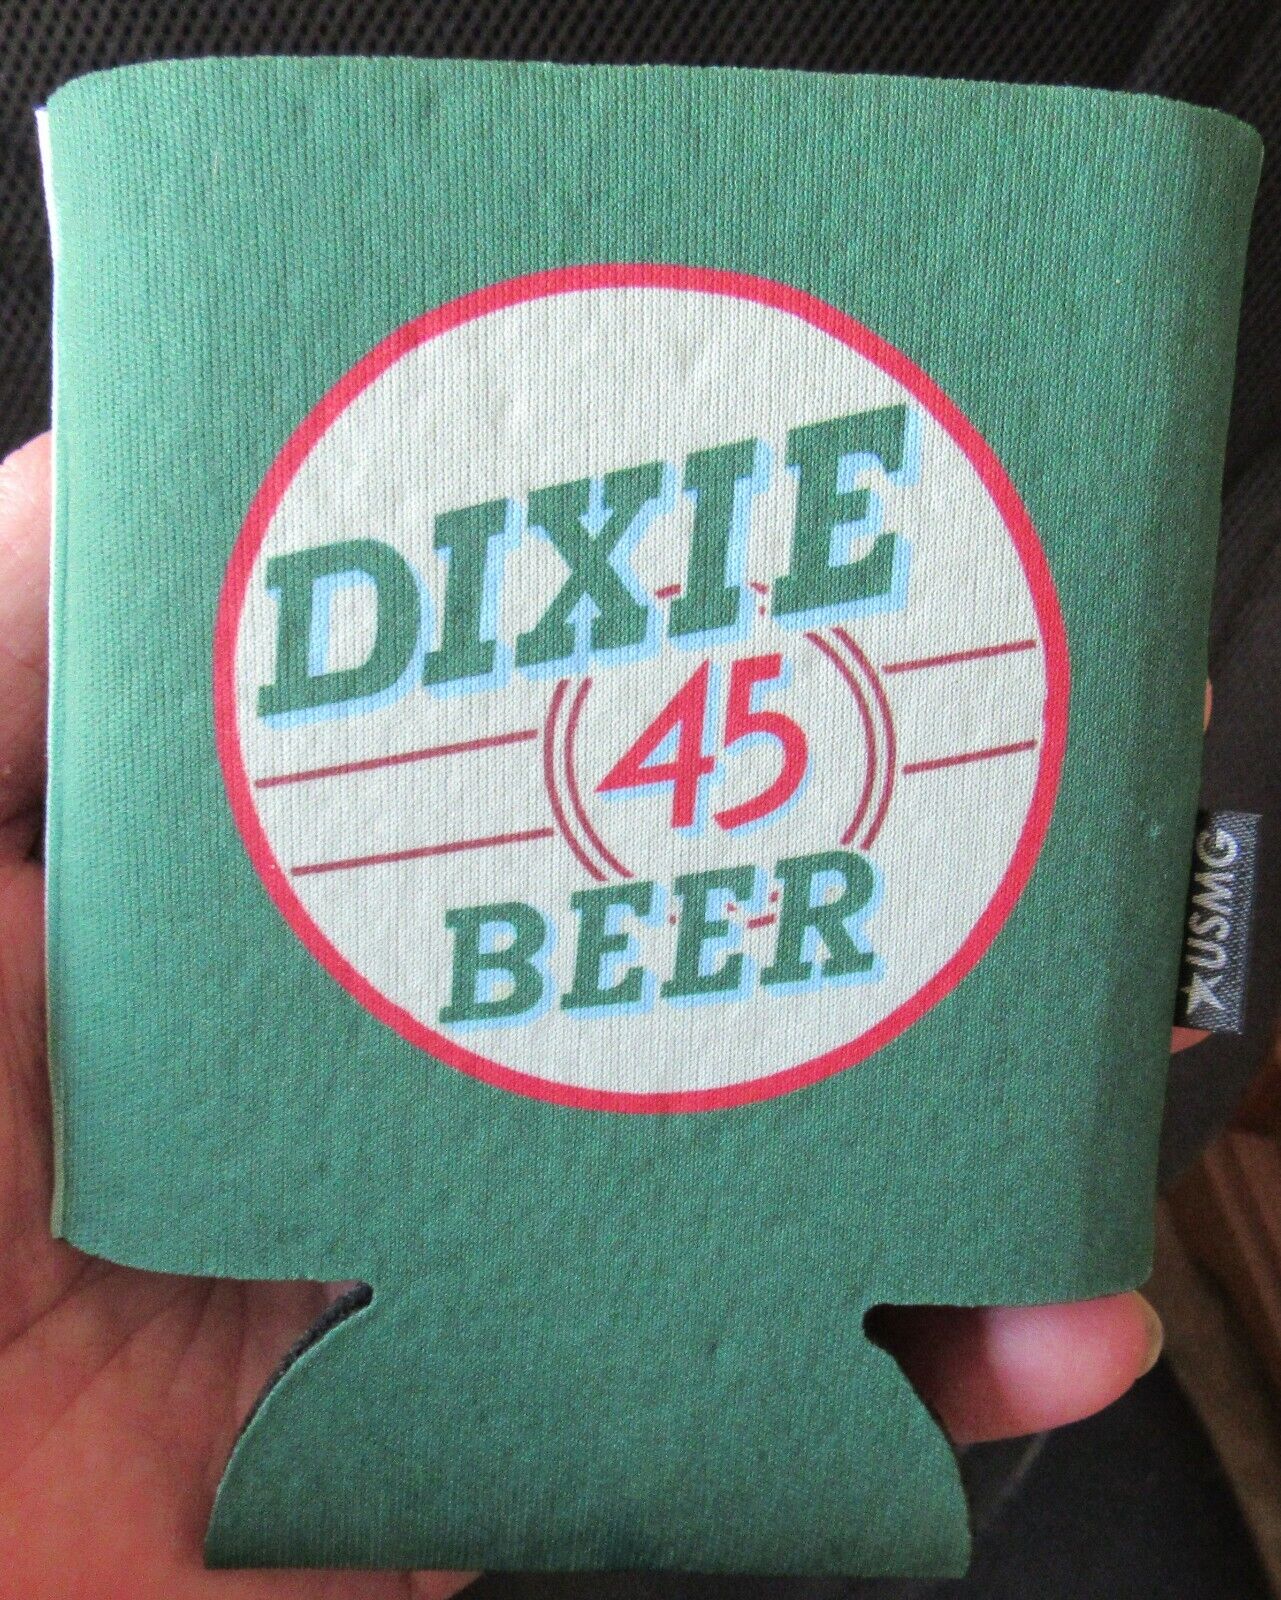 DIXIE 45 BEER CAN/BOTTLE HOLDER KOOZIE COOZIE CHECK IT OUT